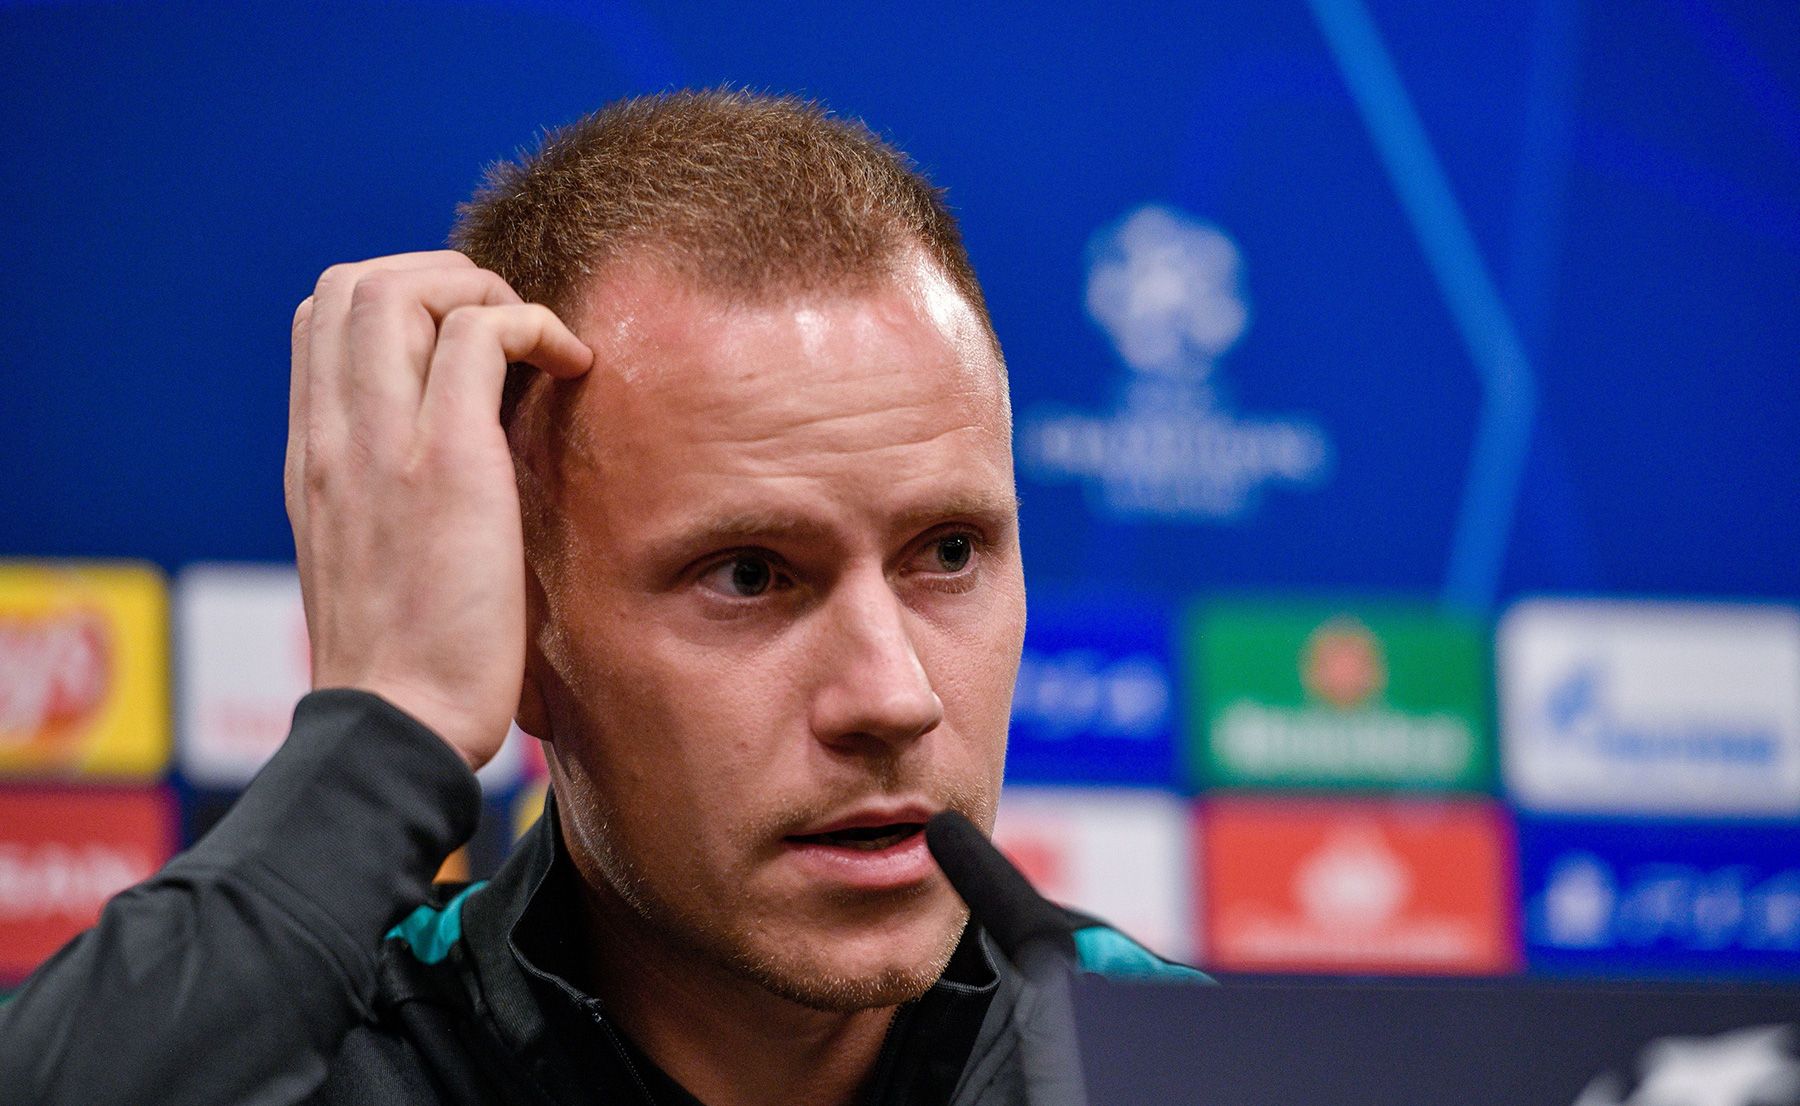 Ter Stegen In the previous press conference against the Dortmund